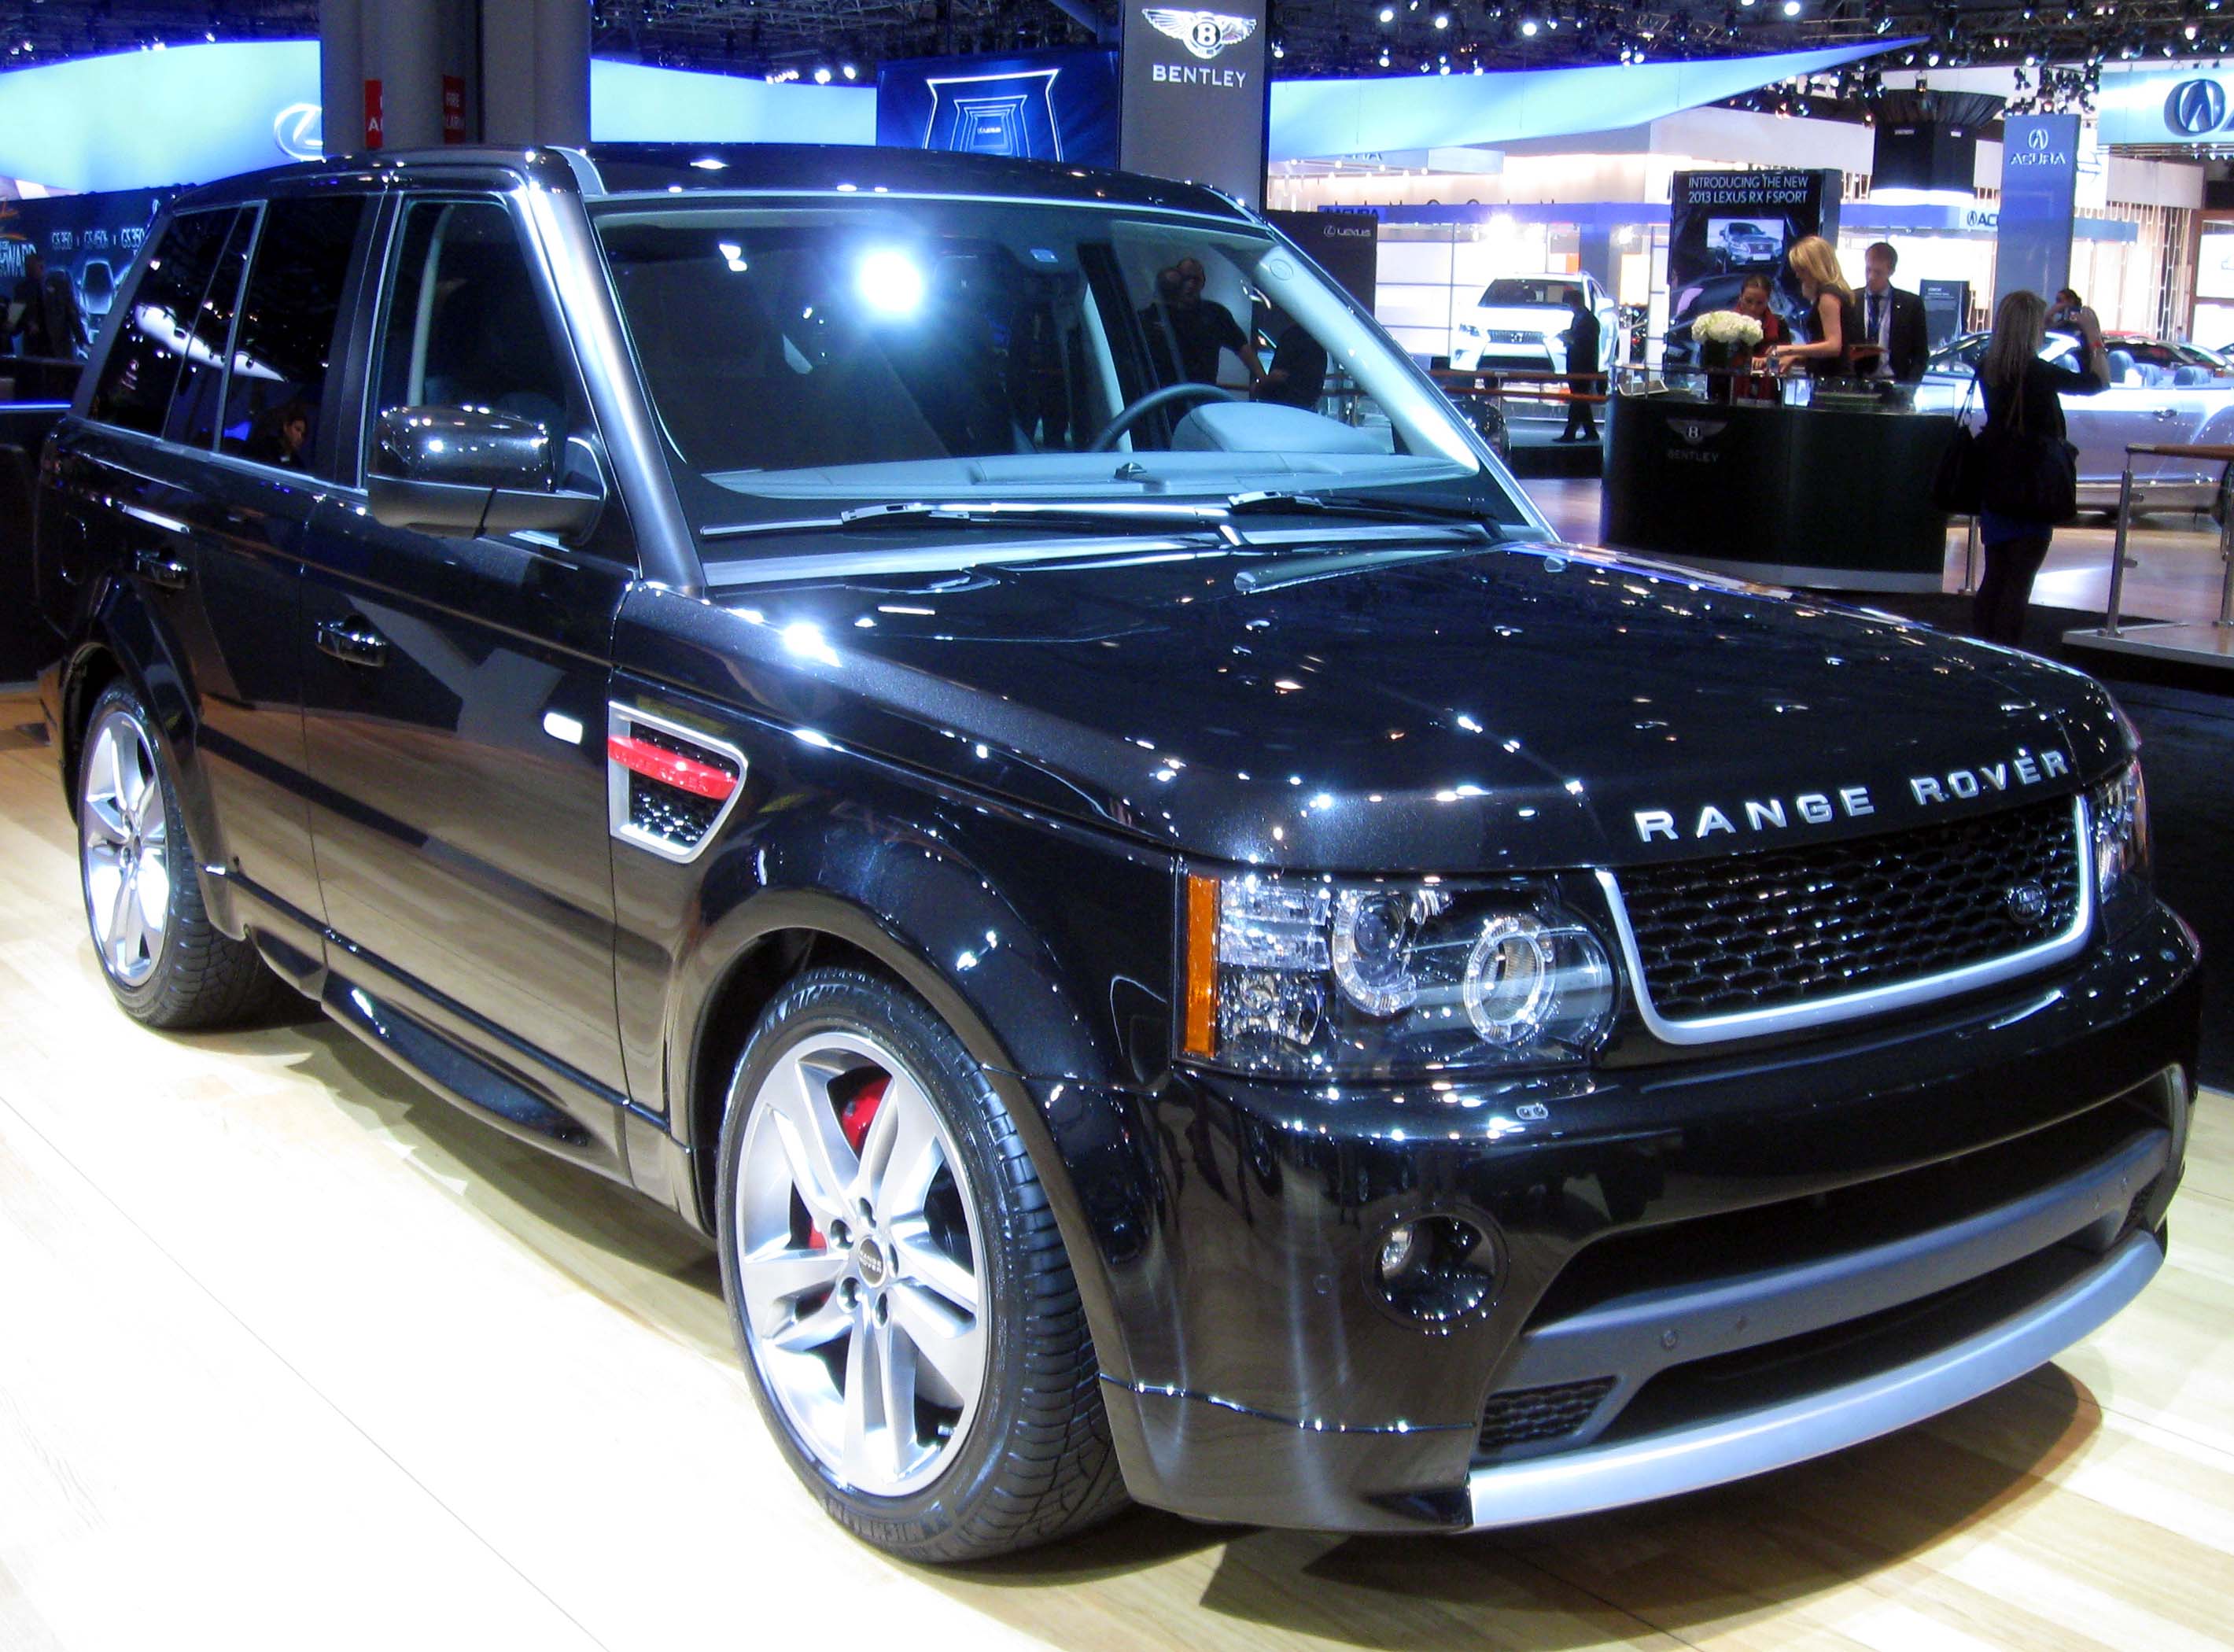 http://upload.wikimedia.org/wikipedia/commons/3/3f/2013_Range_Rover_Sport_Limited_Edition_--_2012_NYIAS.JPG